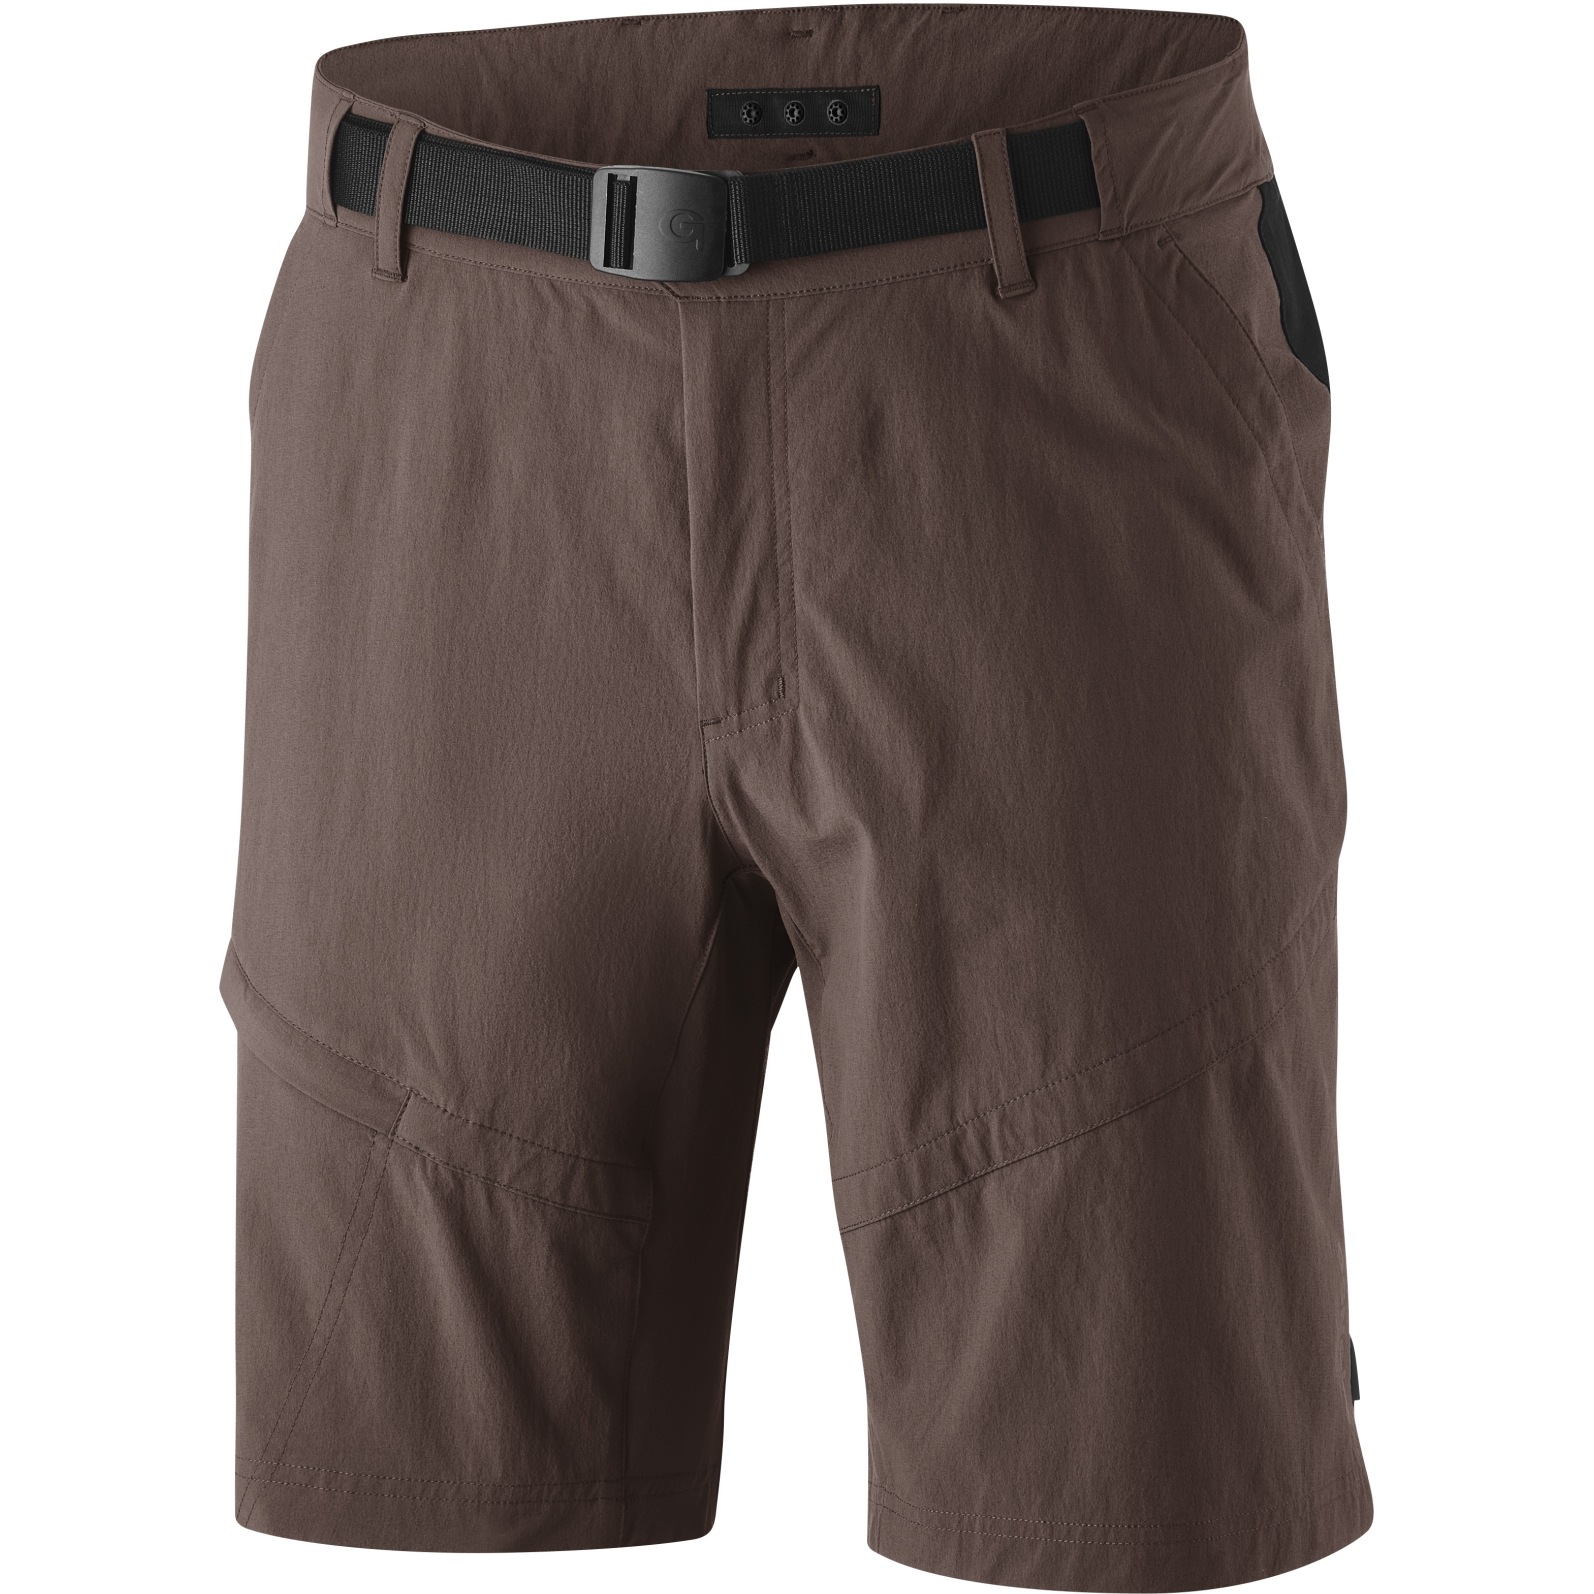 Picture of Gonso Arico Bike Shorts Men - Fossil